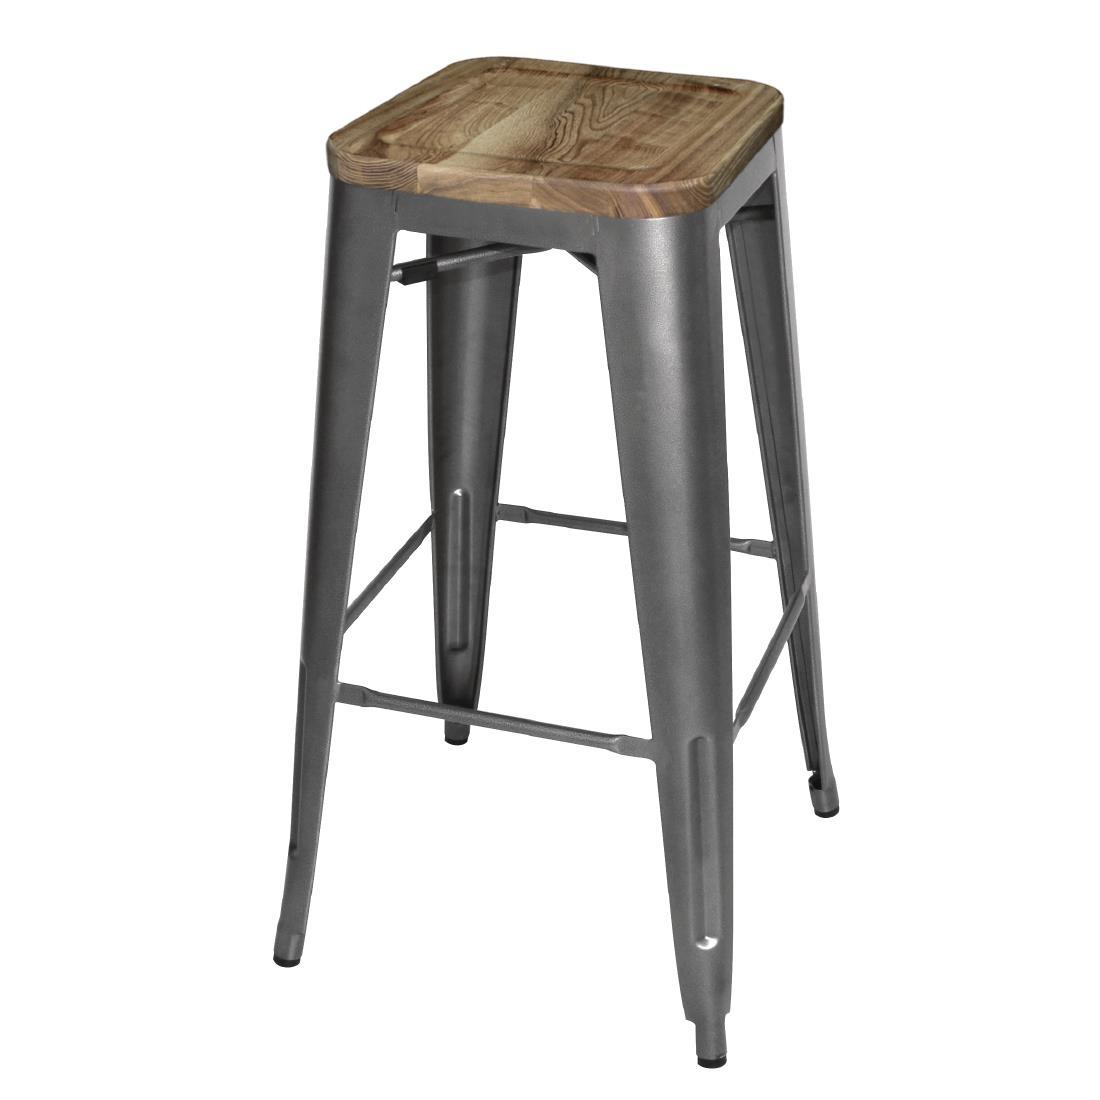 Bolero Bistro High Stools with Wooden Seat Pad Gun Metal (Pack of 4) - GM639  - 1